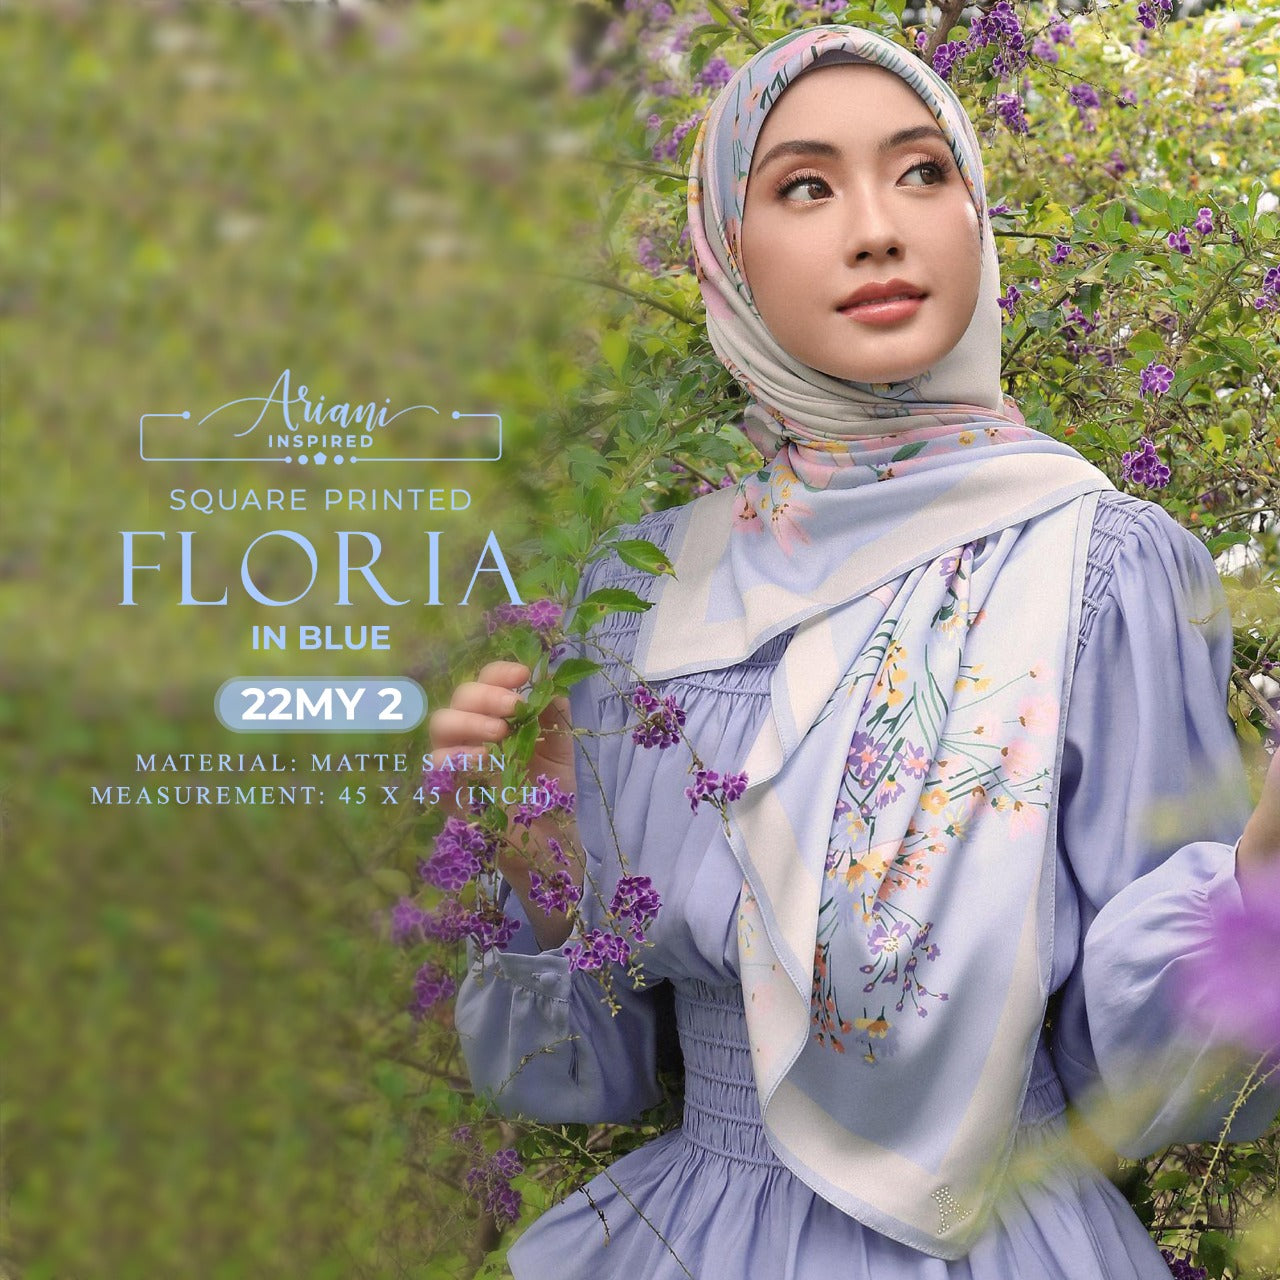 Ariani Inspired Printed Floria SQ Collection